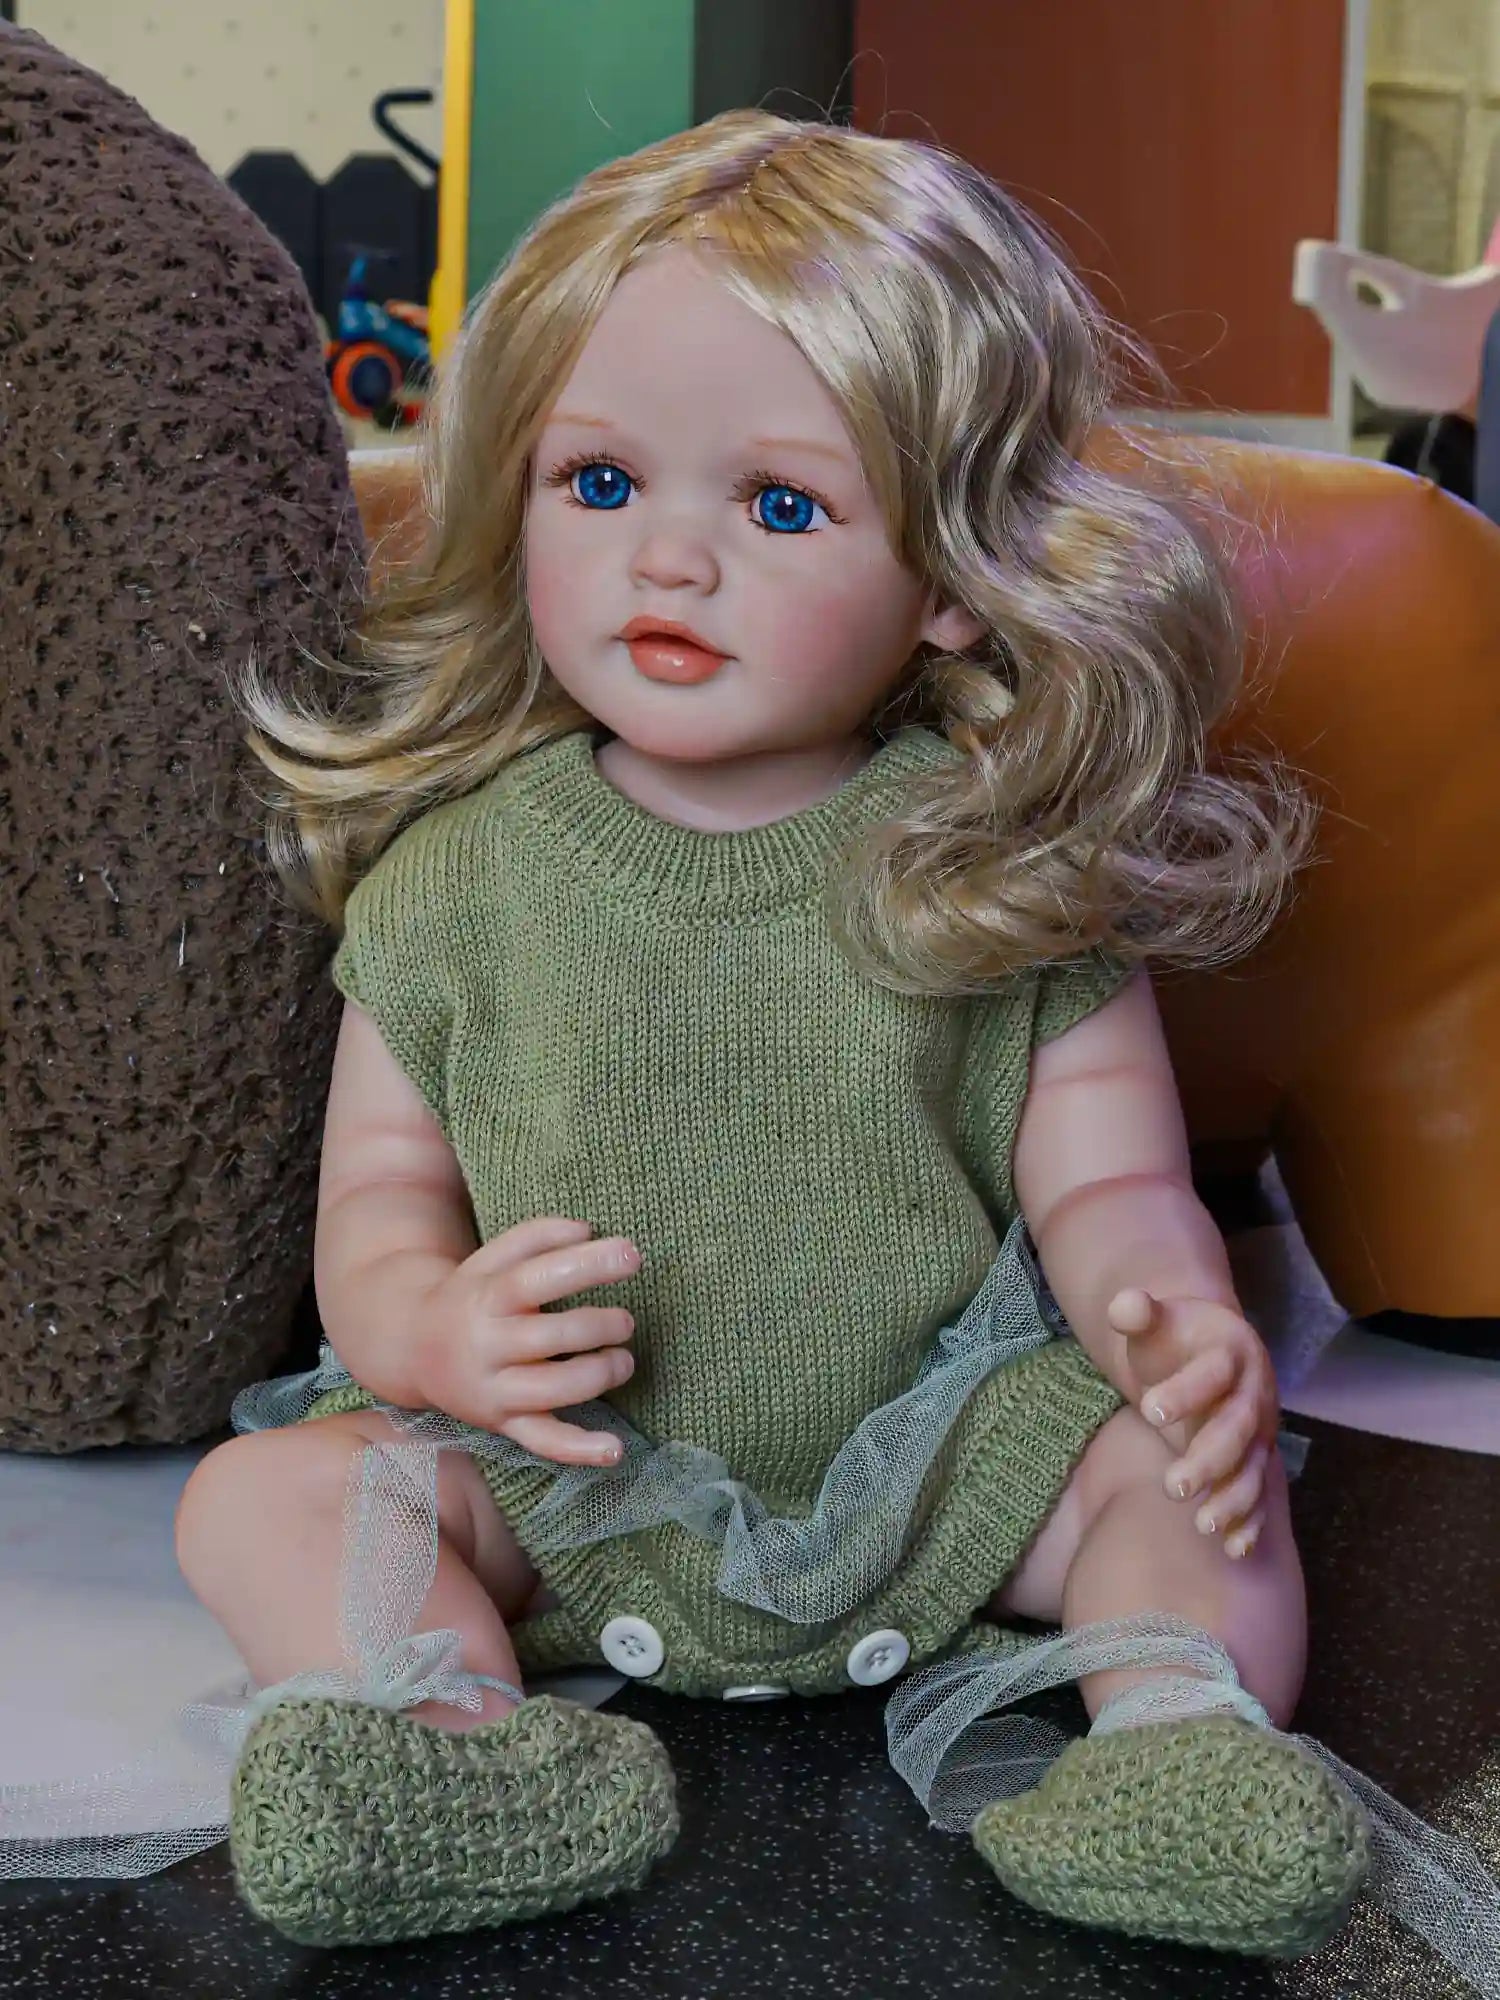 Meet our handcrafted reborn doll, a vision of beauty with her golden curls and deep blue eyes, dressed in a soft green knit that whispers of spring.